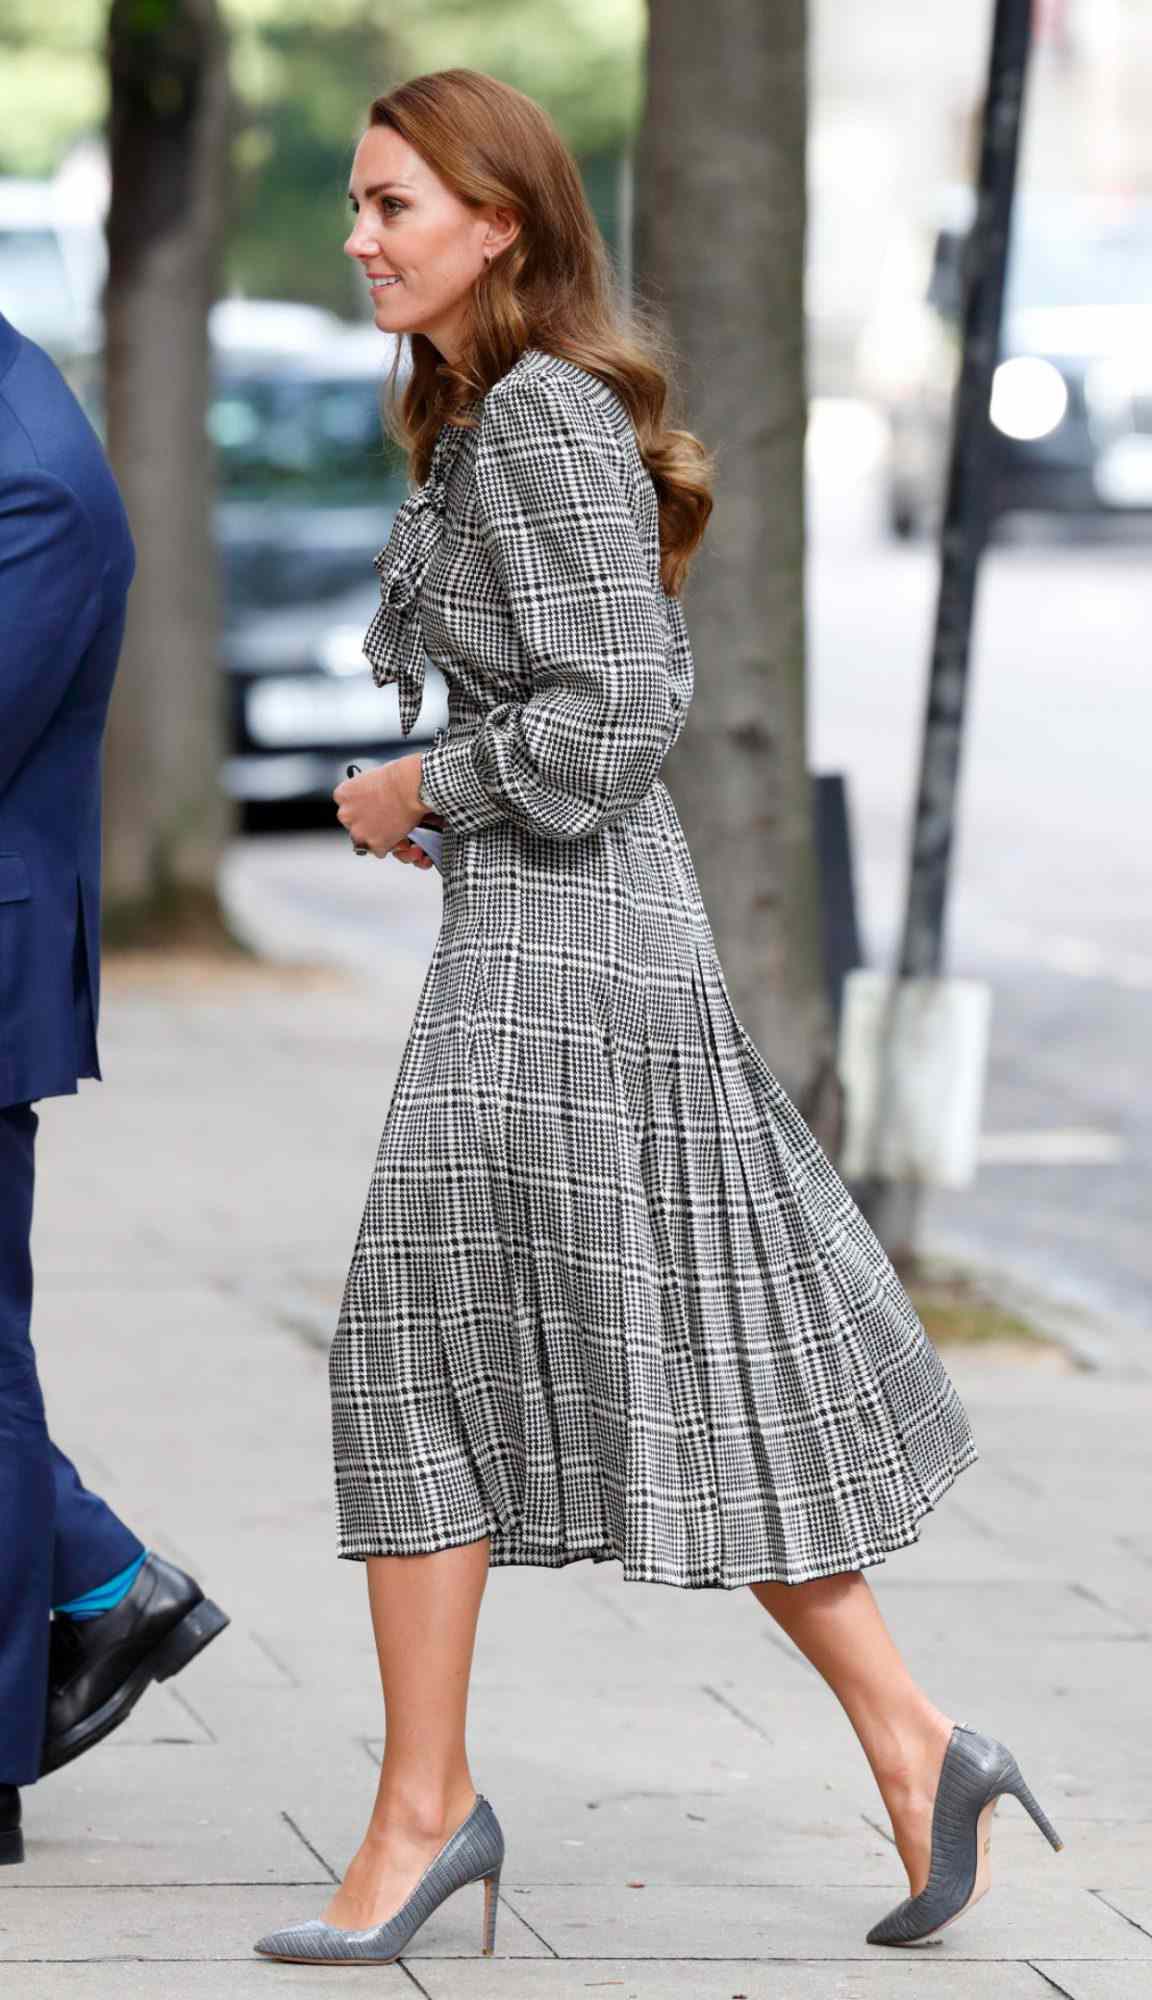 Kate Middleton in a black-and-white plaid dress with gray pumps